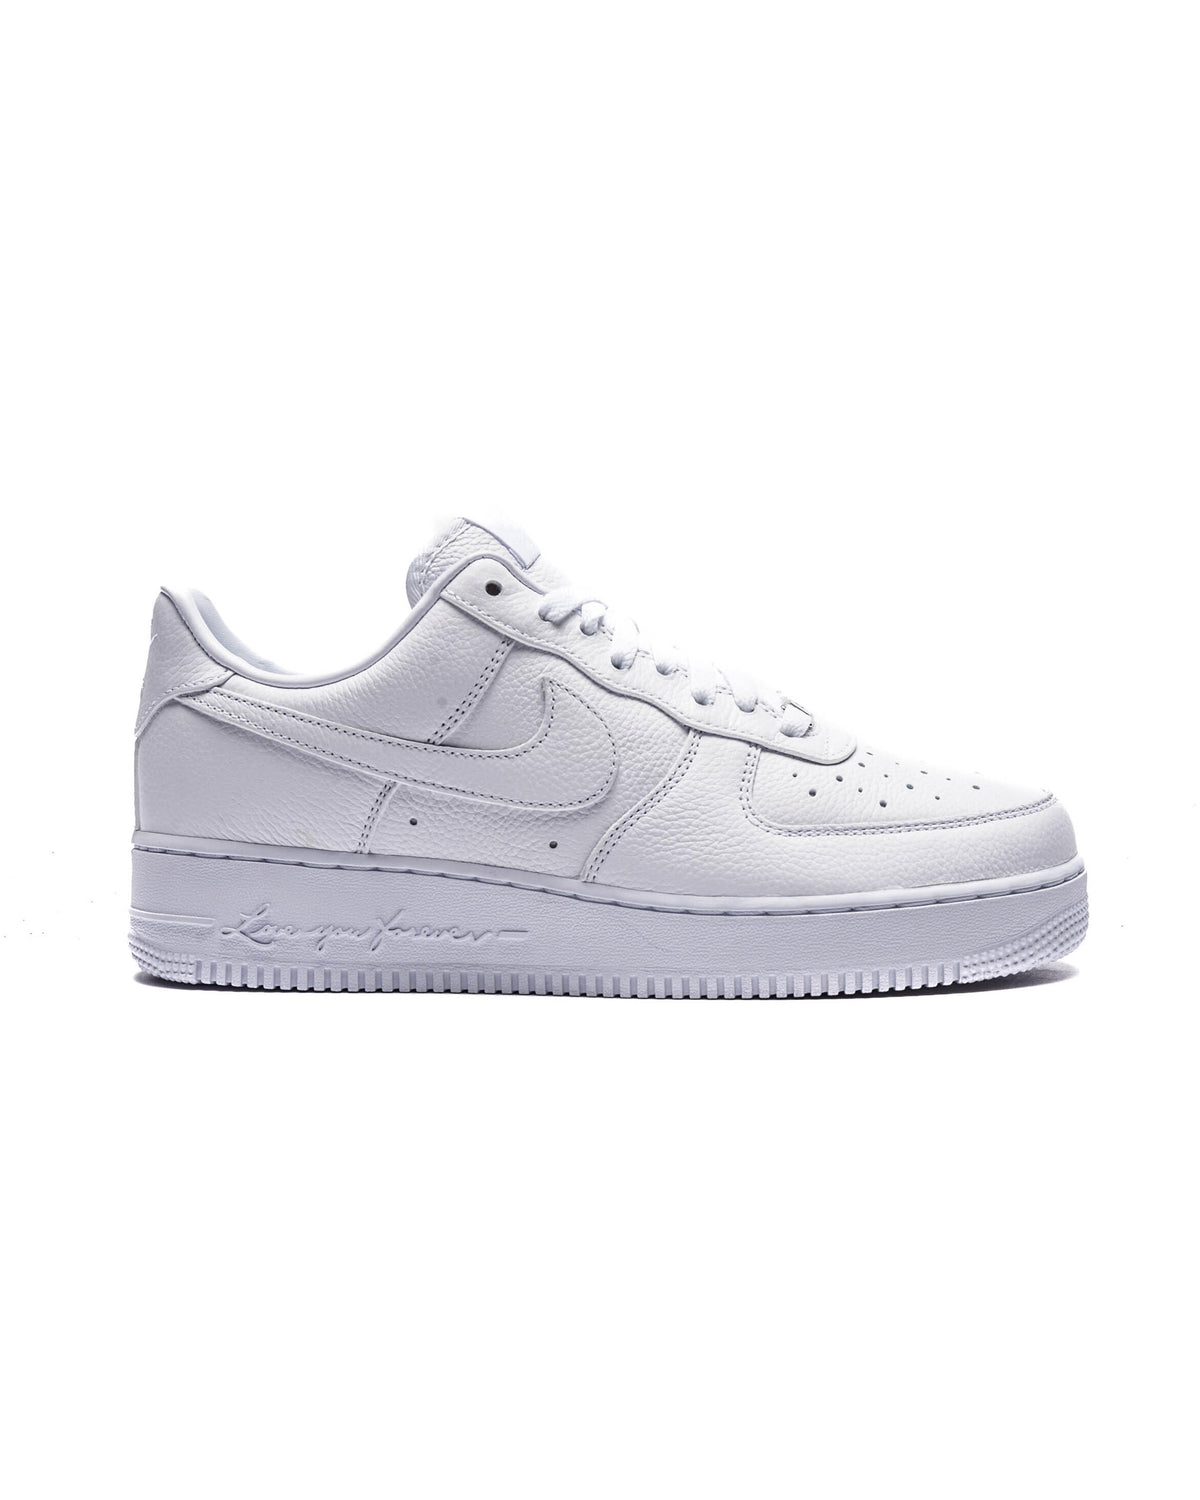 Nike x NOCTA Air Force 1 Low